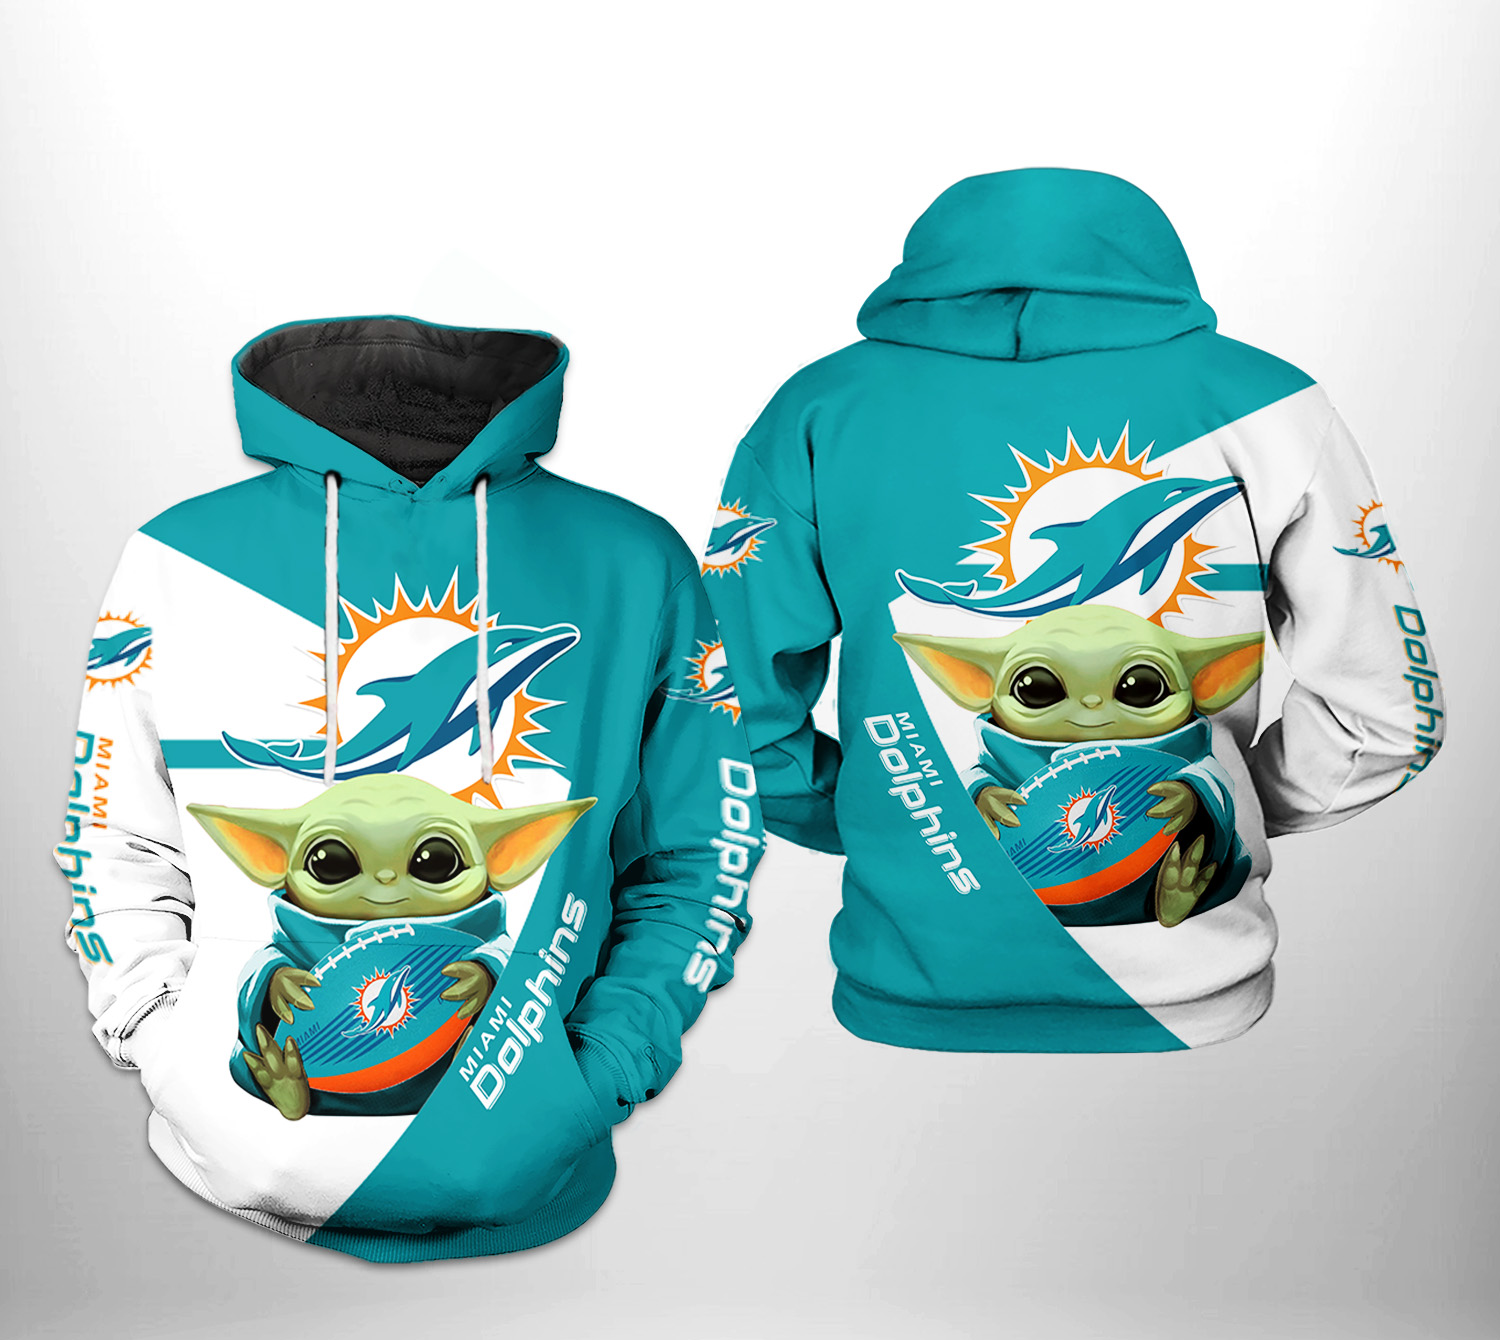 Miami Dolphins Shop - Miami Dolphins NFL Baby Yoda Team 3D Printed HoodieZipper Hoodie